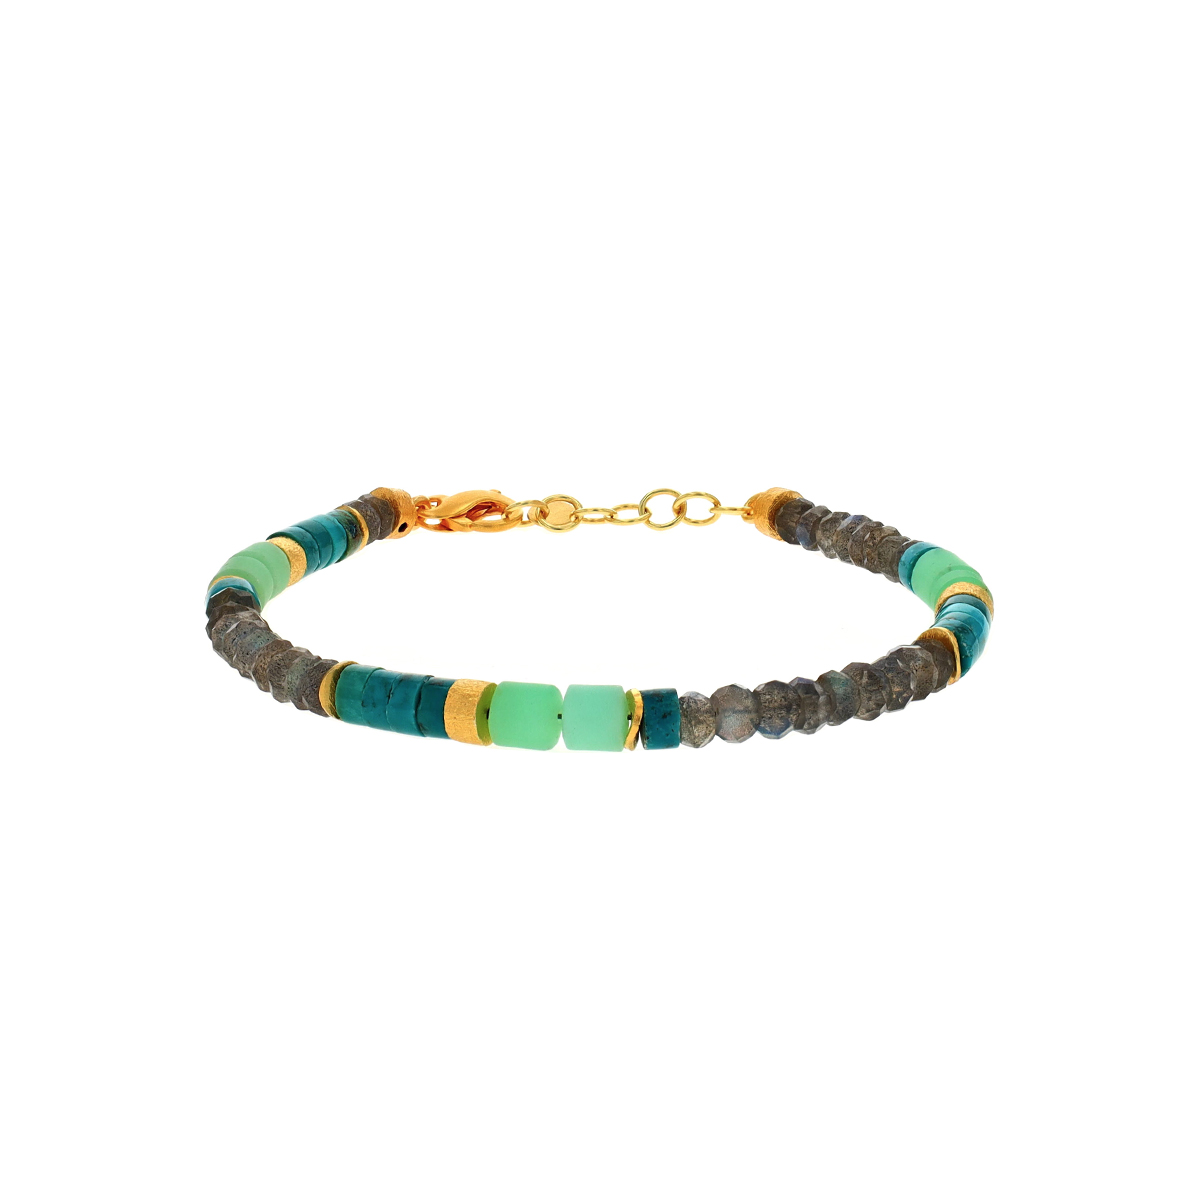 Gold Plated Sterling Silver Labradorite, Turquoise, and Chrysocolla Bracelet